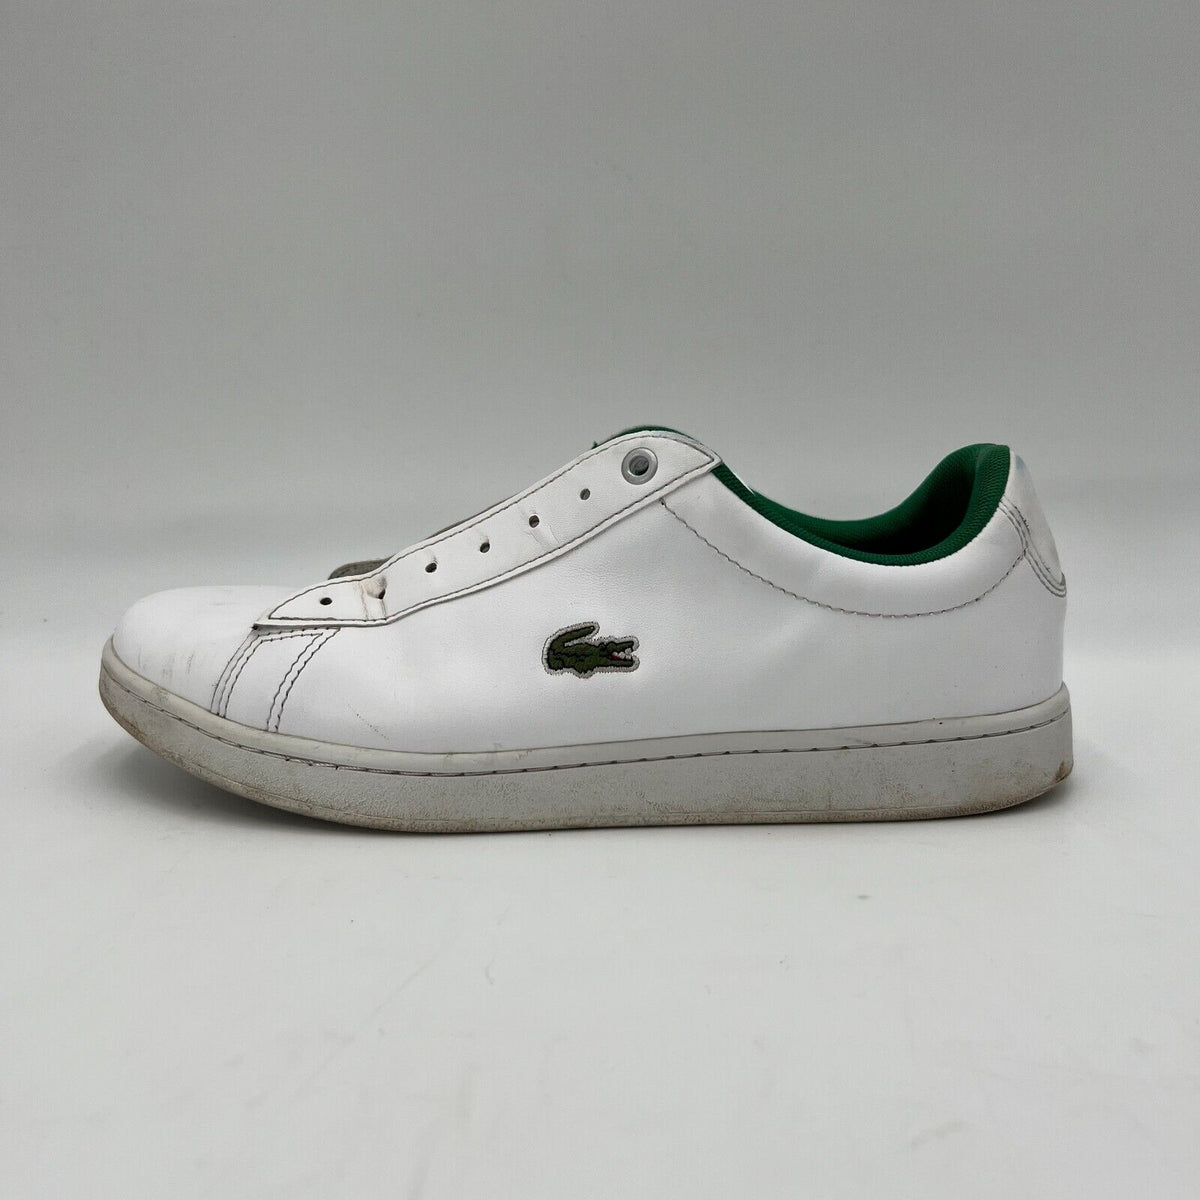 LACOSTE Hydez 119 1 P Sma Leather Sneaker Men's Size US 9 White/Green